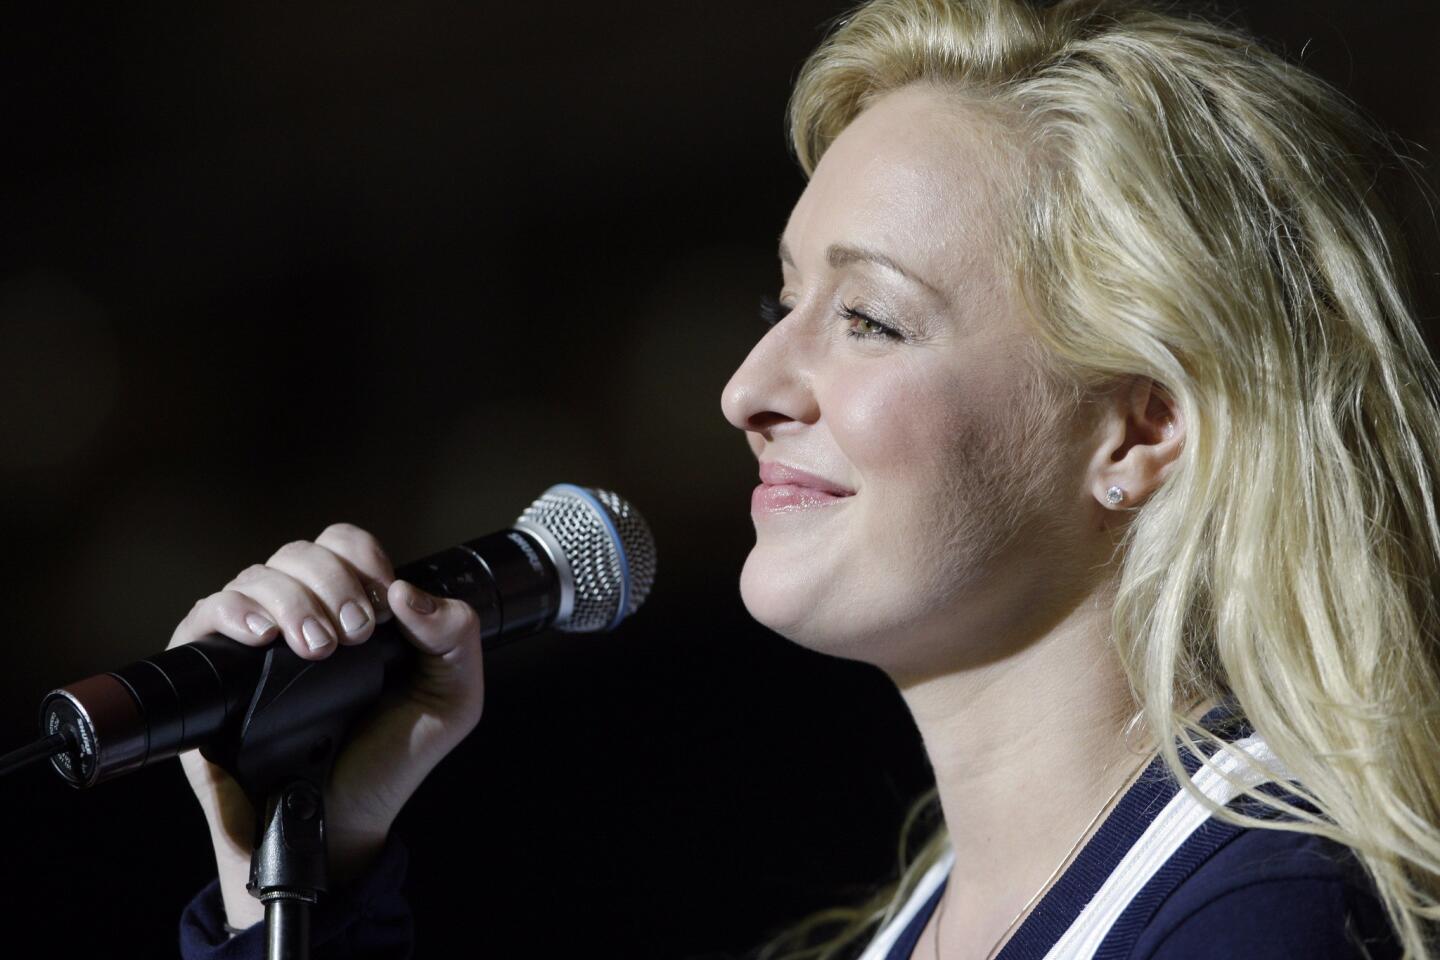 Mindy McCready dead in apparent suicide; country singer was 37